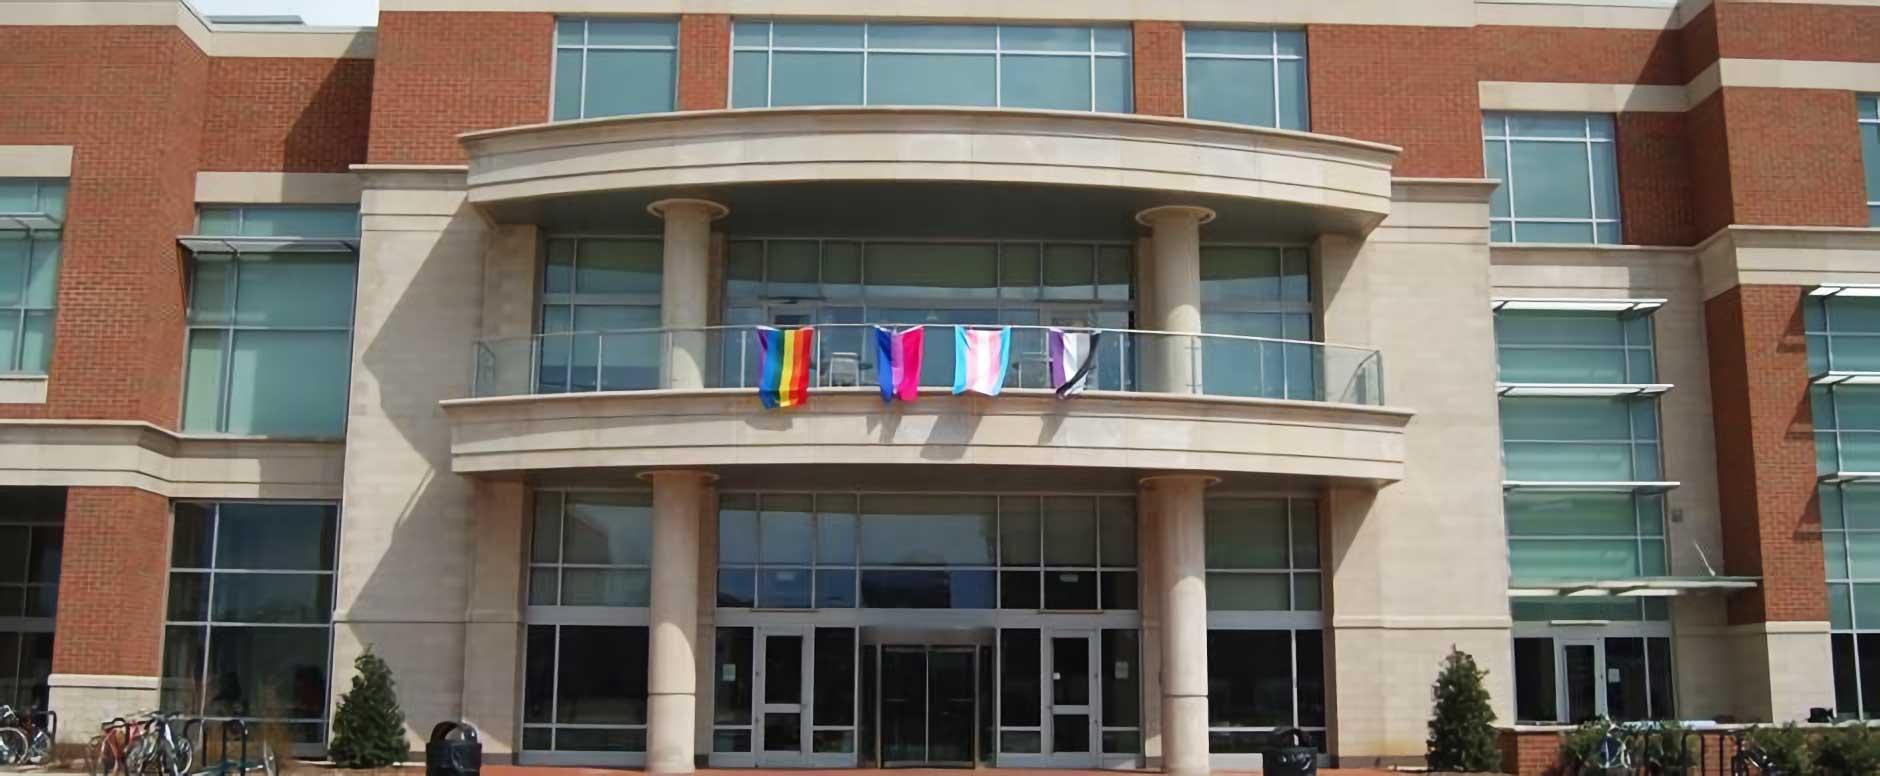 balcony with pride flags